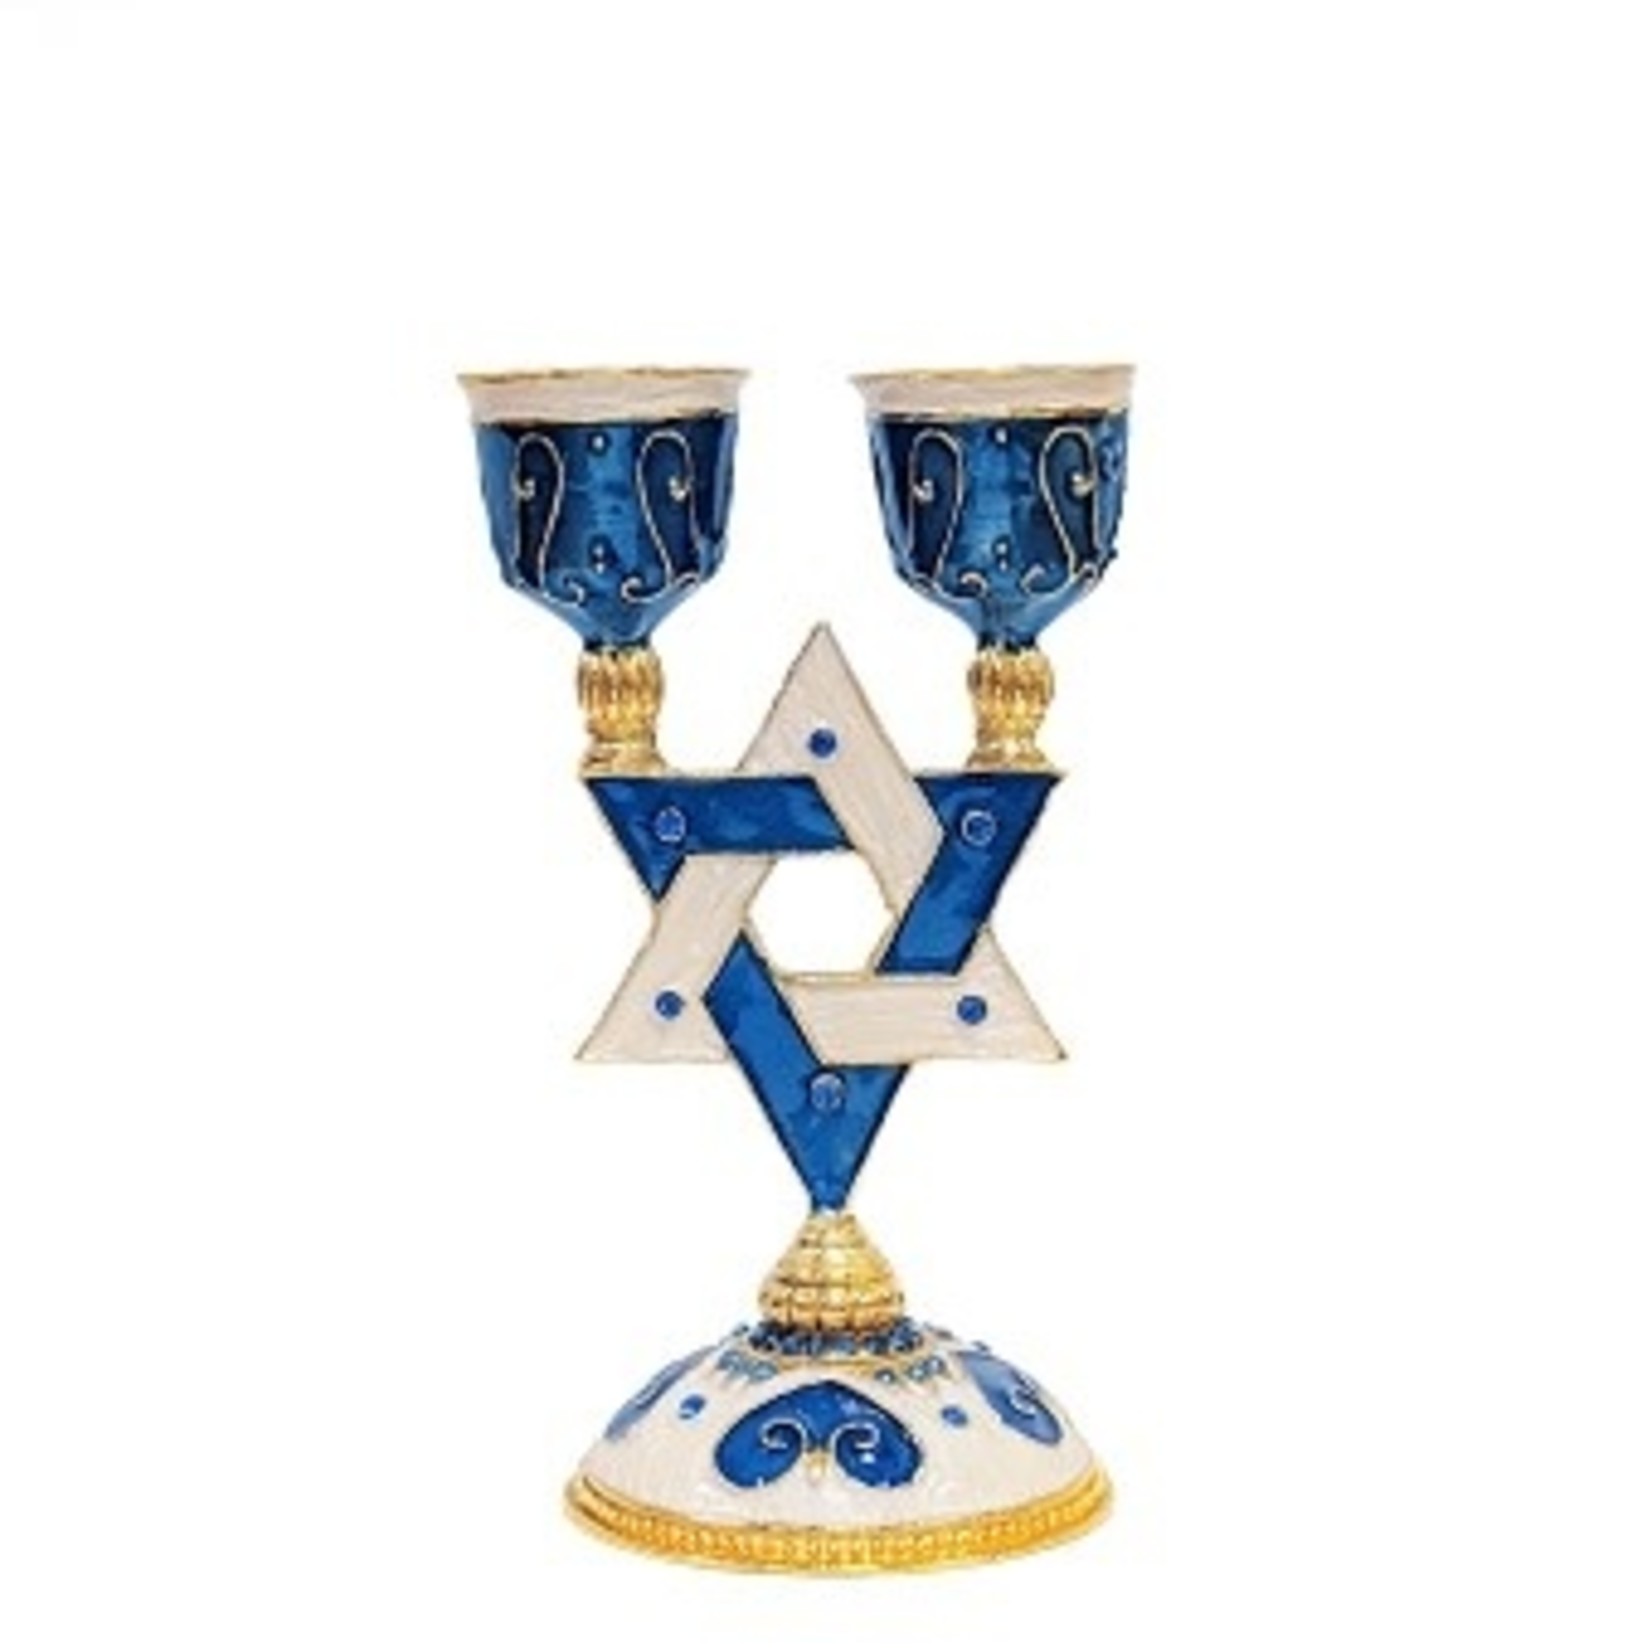 Shabbat Blue Star of David Double Cups Hand Painted Enamel with Genuine Crystals